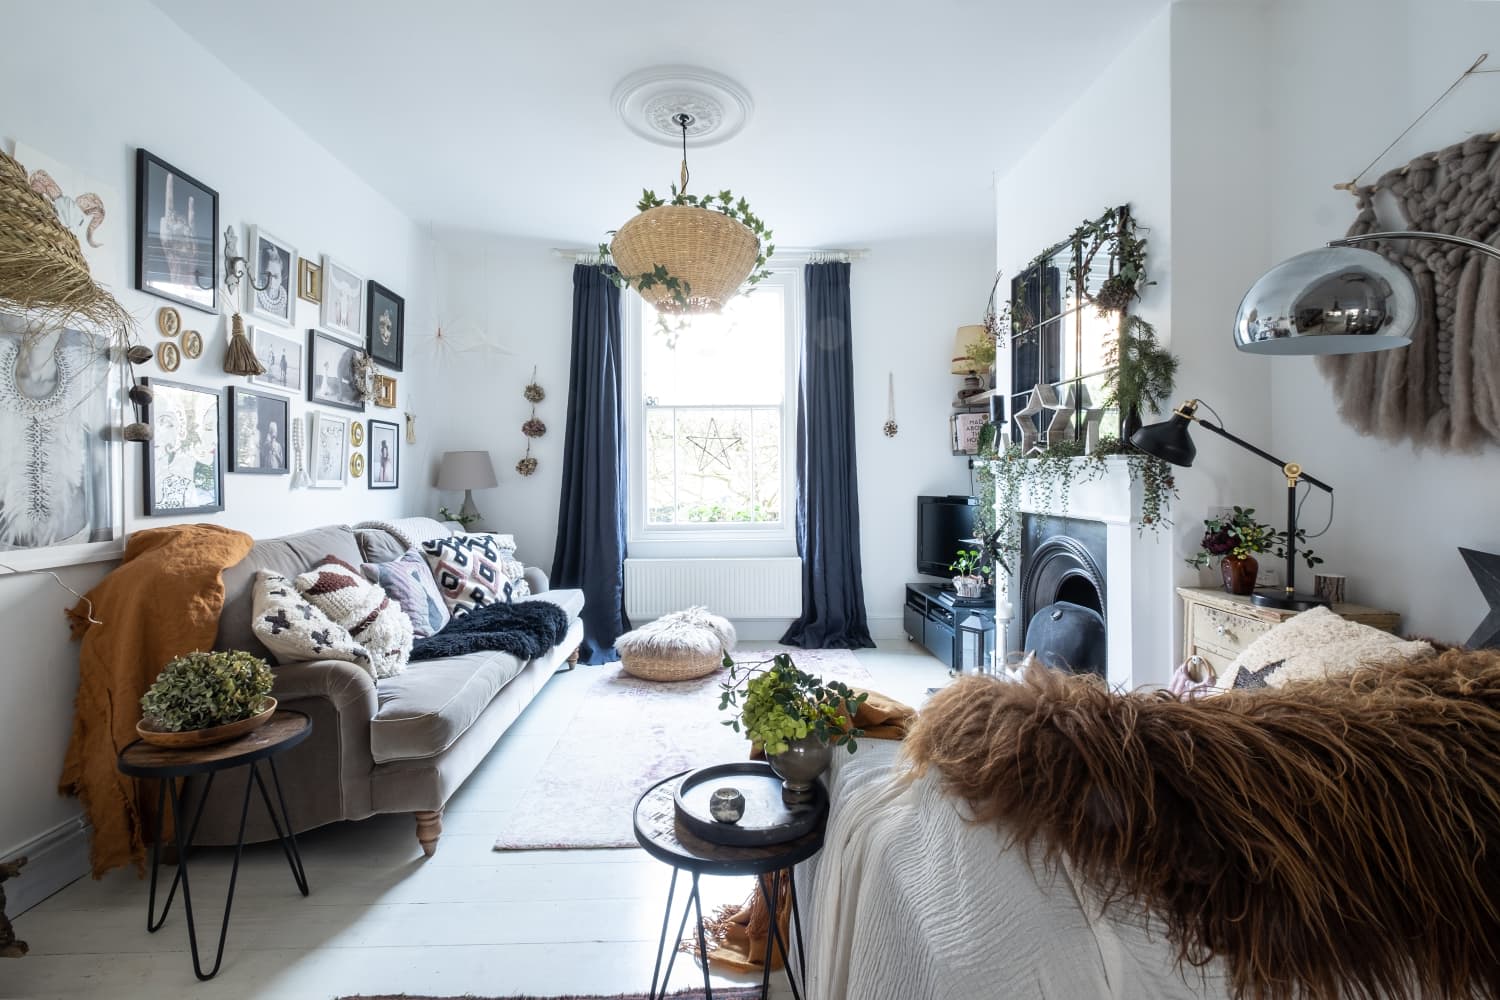 The Changes You Should Make in Your Home This Month, According to Your Zodiac Sign